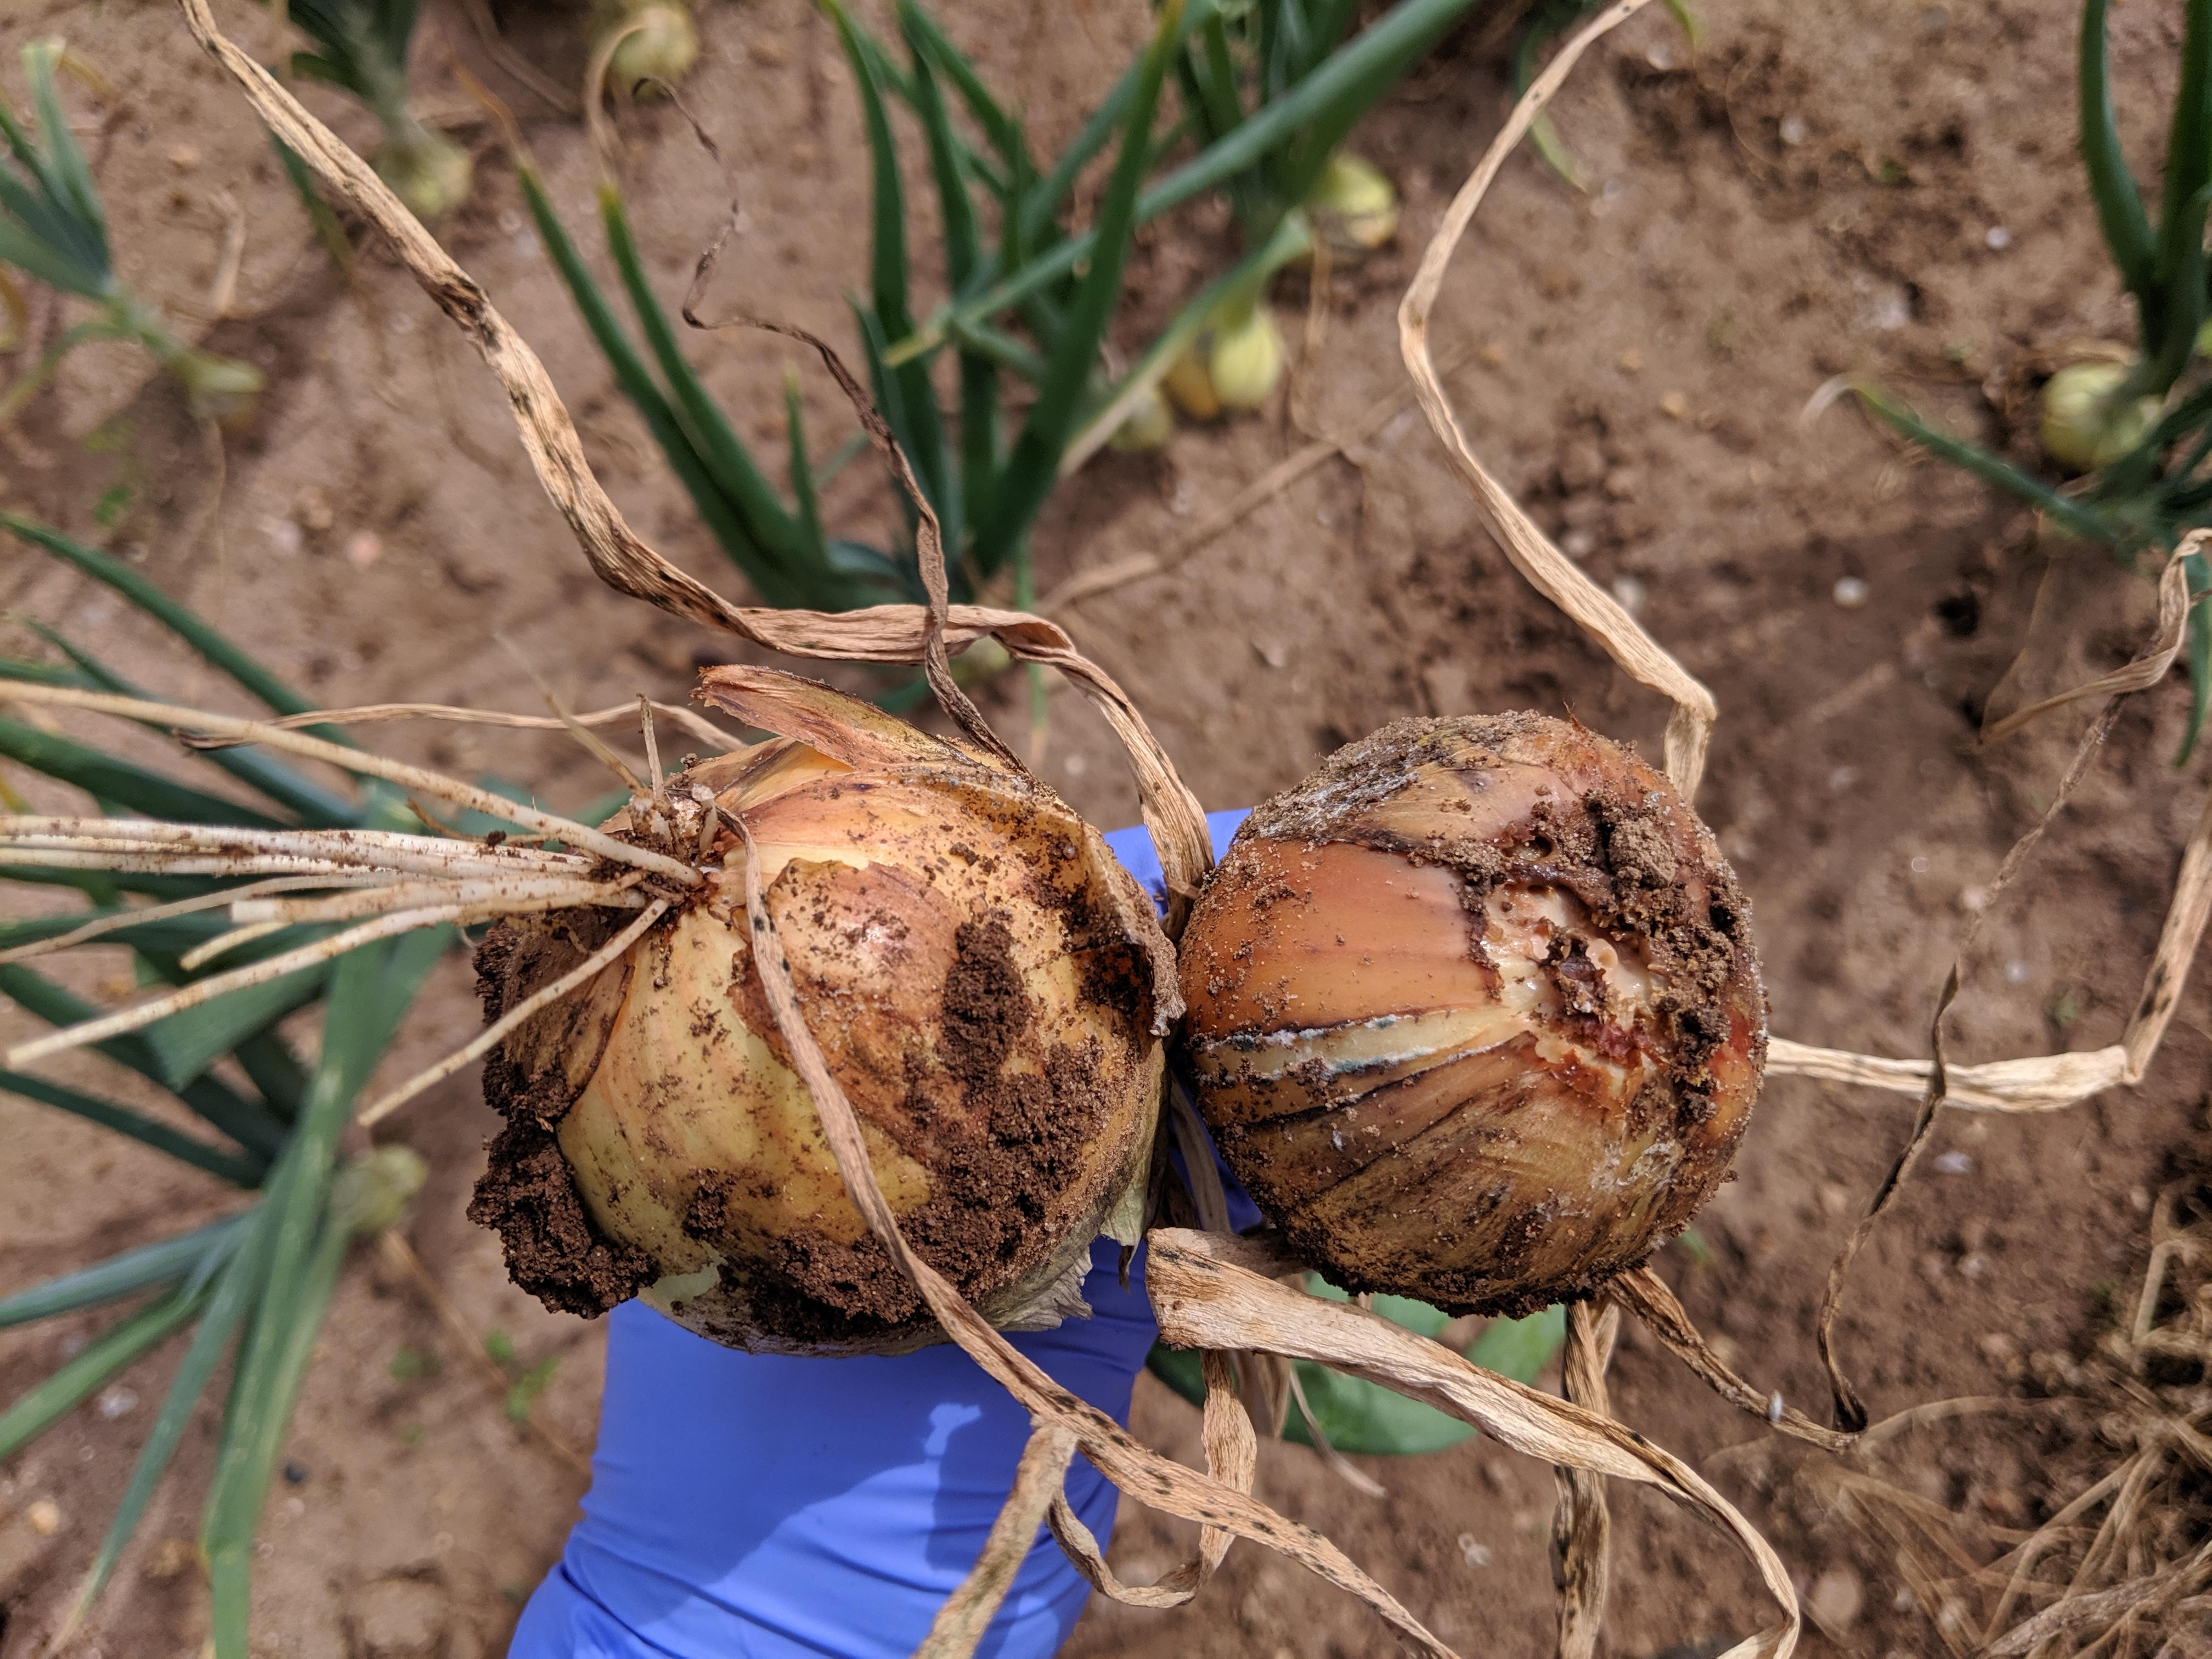 Onions harvested from the field showing disease